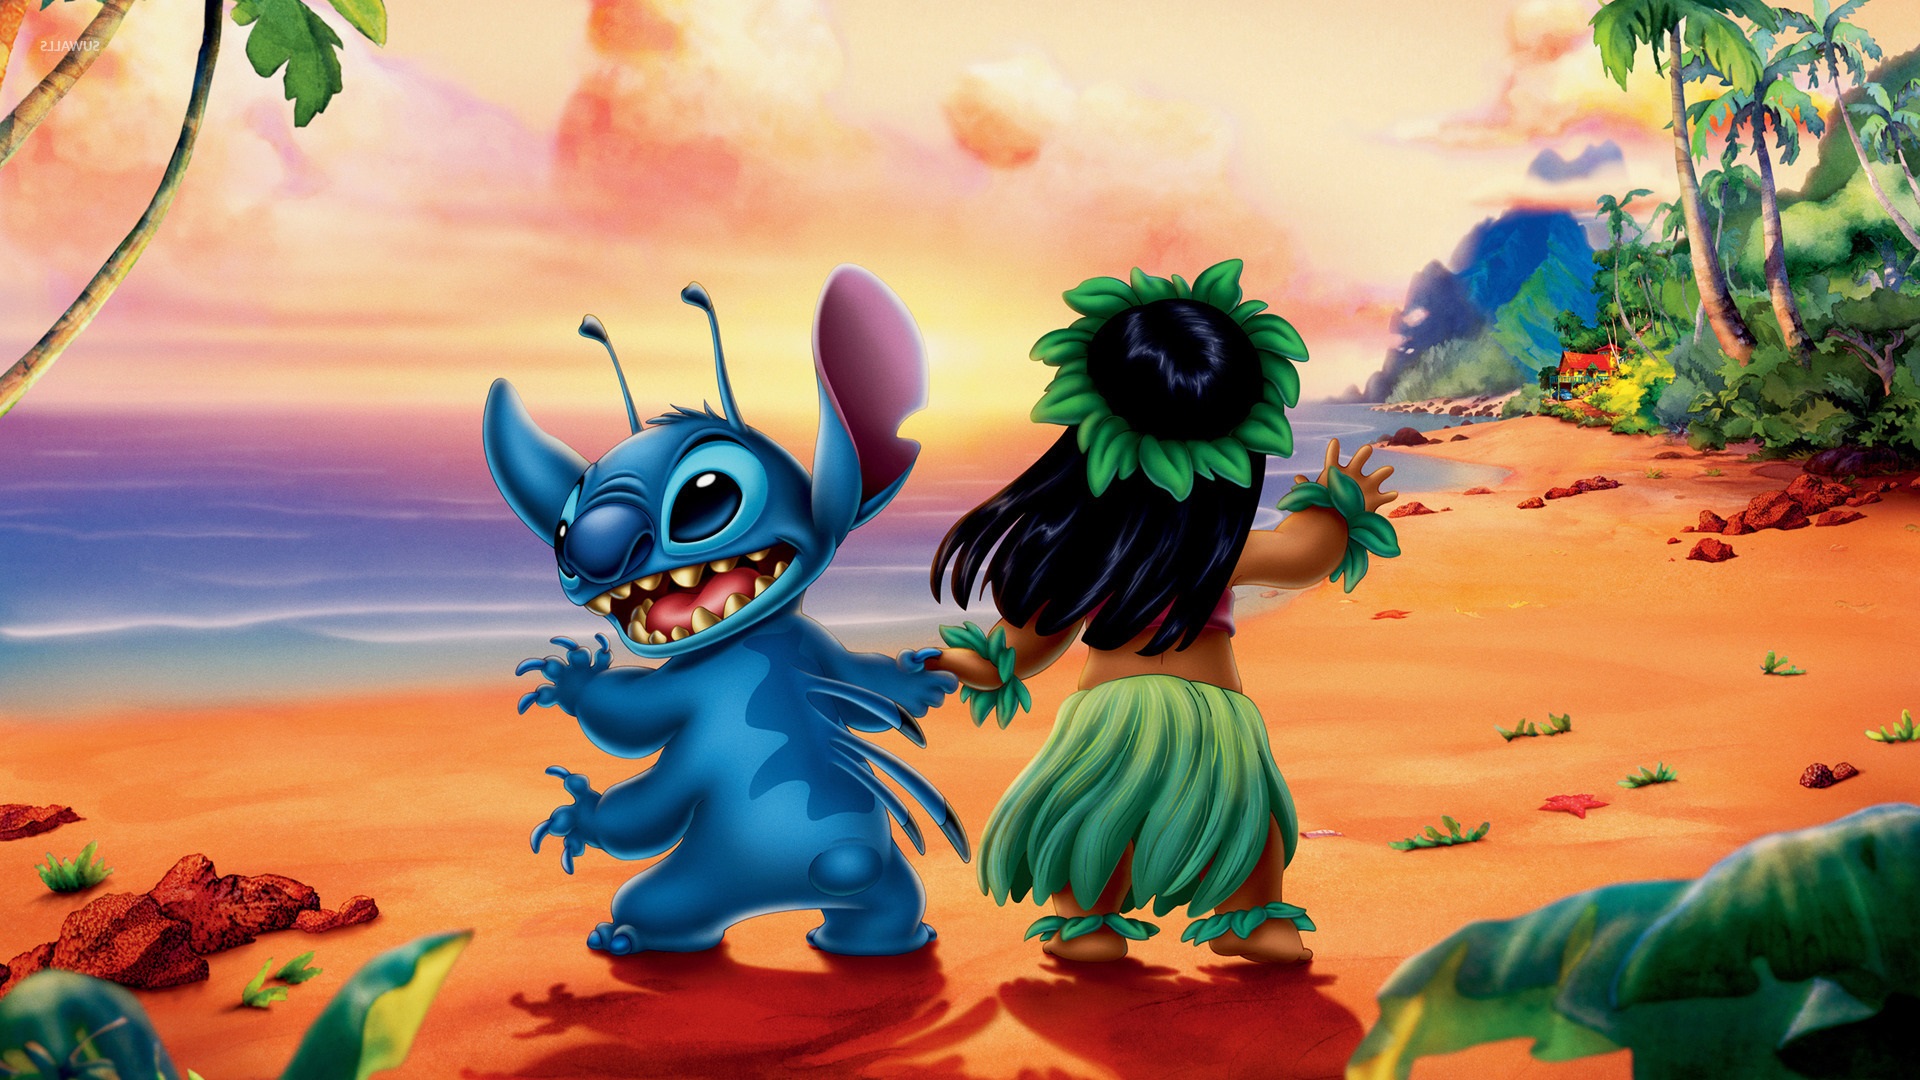 Disney's Lilo & Stitch: Hawaiian Discovery Images - LaunchBox Games ...